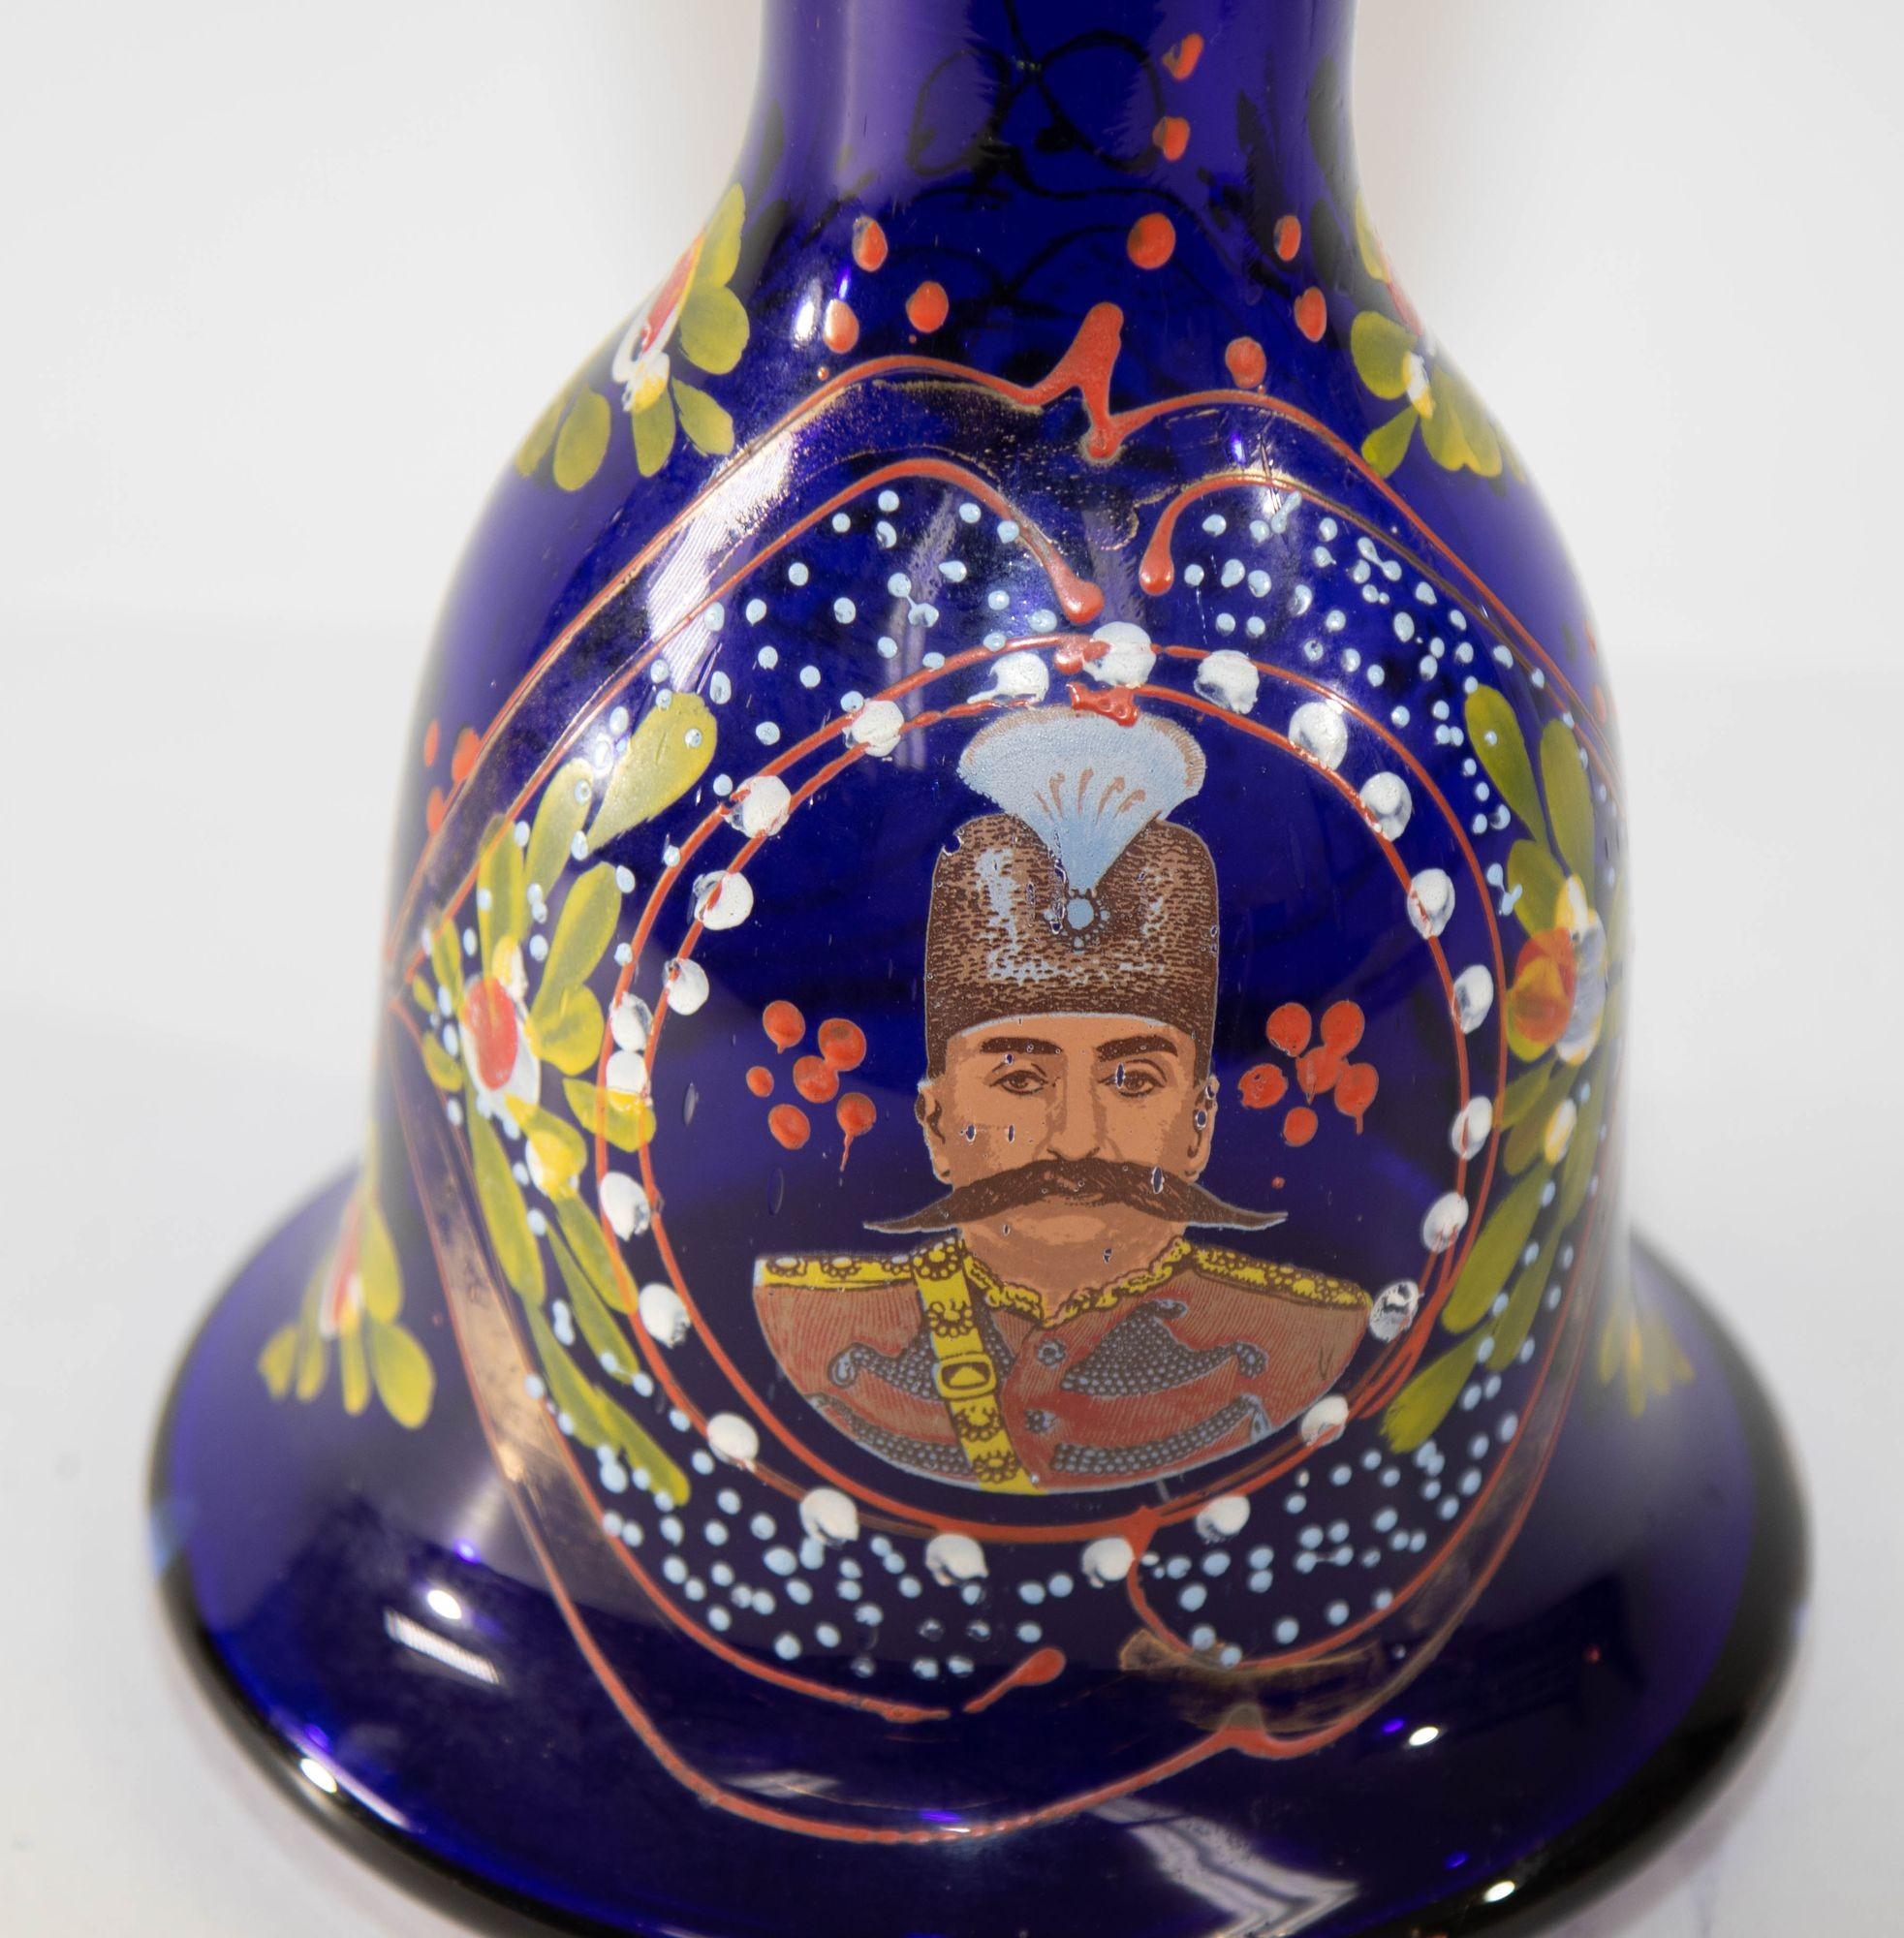 Royal blue opaque enameled Bohemian glass hookah base, or vase.
Bohemian glass hookah base with overlay enameled in yellow, amber, green, red, and white with additional gilt.
The elegant bell shape bowl huqqa’s base is hand-painted with corf flowers